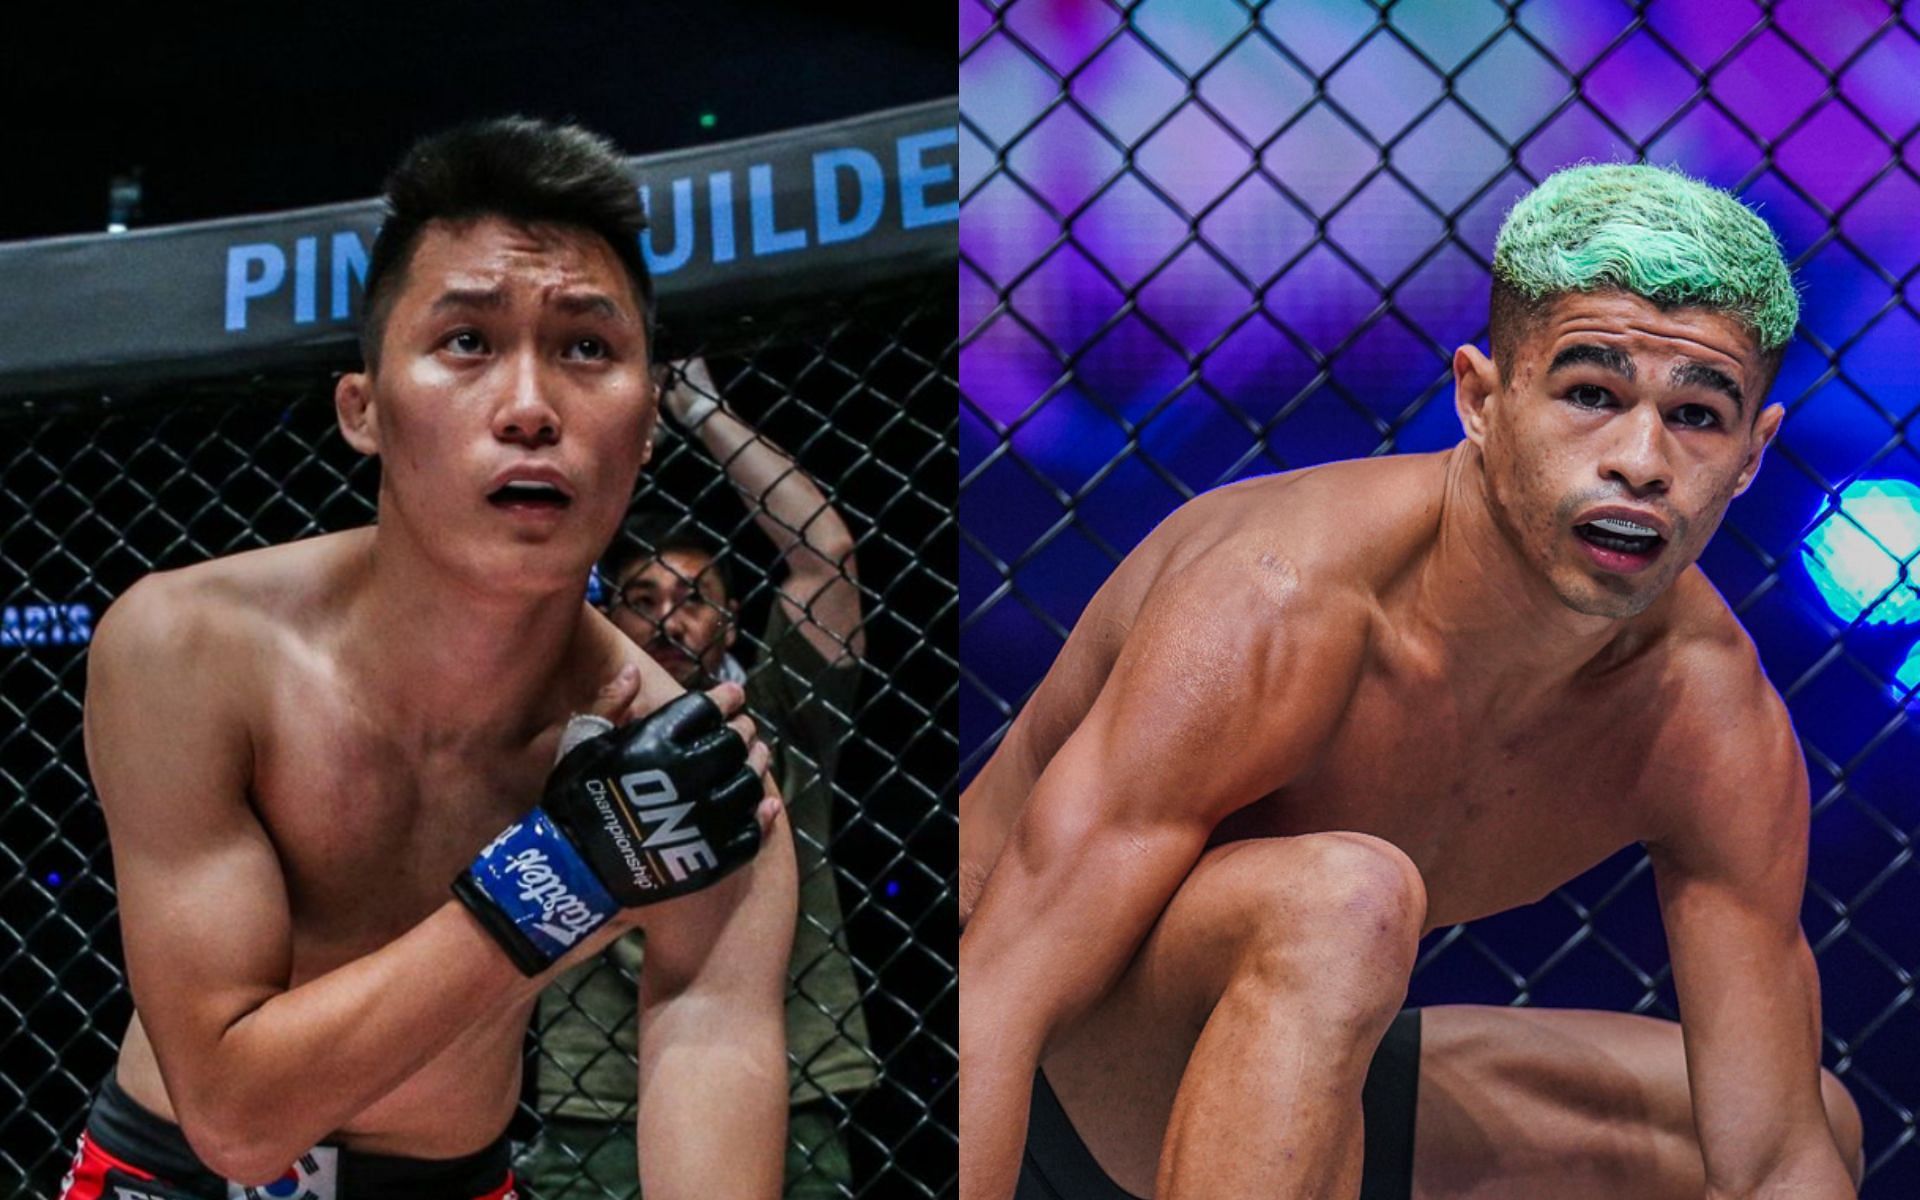 Kwon Won Il (left) says he plans to punch Fabricio Andrade (right) in the mouth at ONE 158. [Photos ONE Championship]